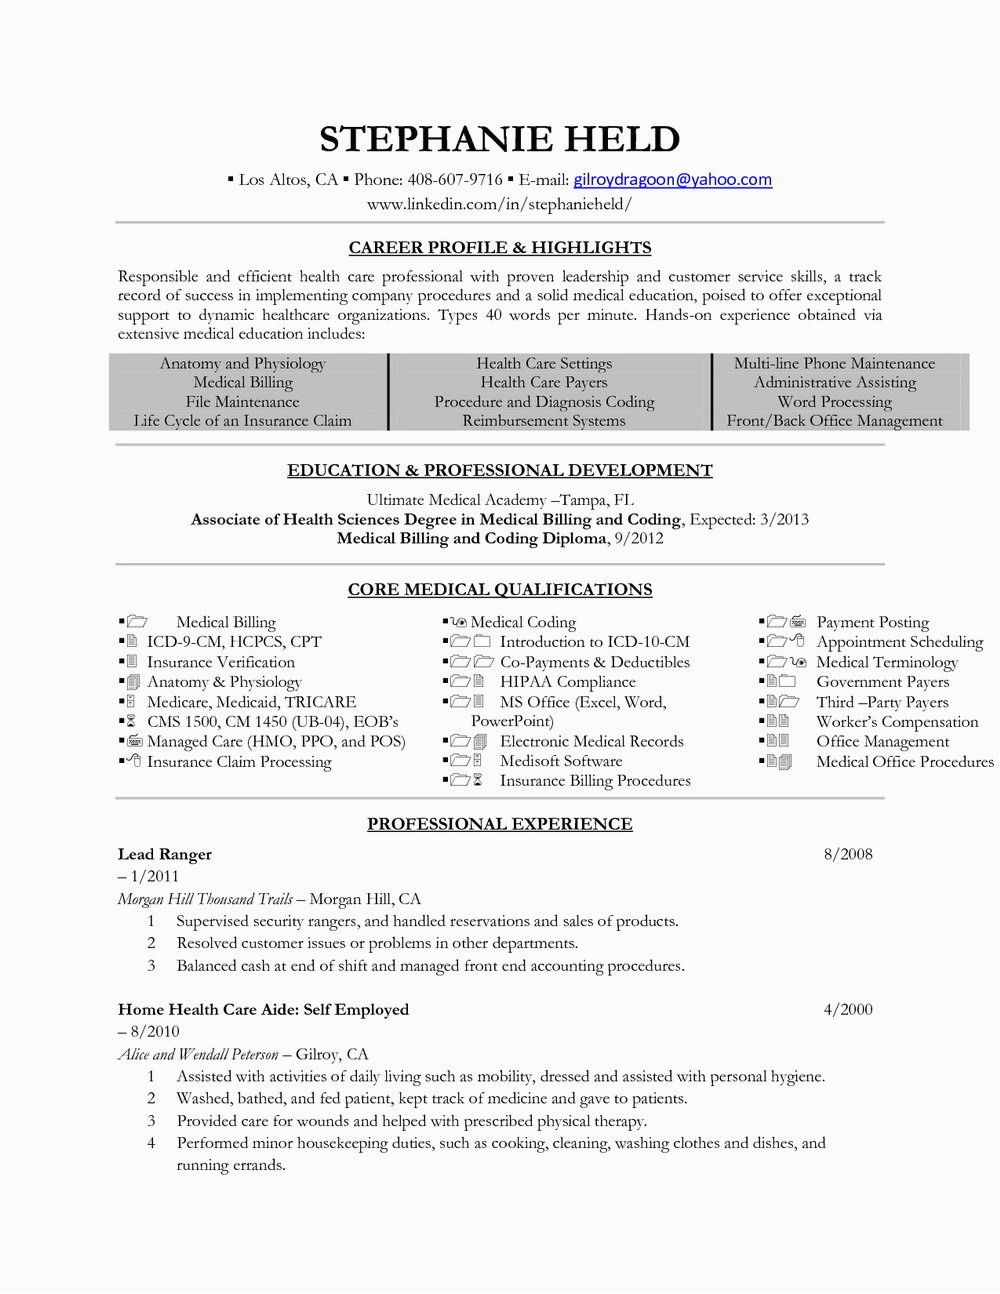 Healthcare Billing and Coding Resume Samples Medical Billing and Coding Resume Samples at Templates